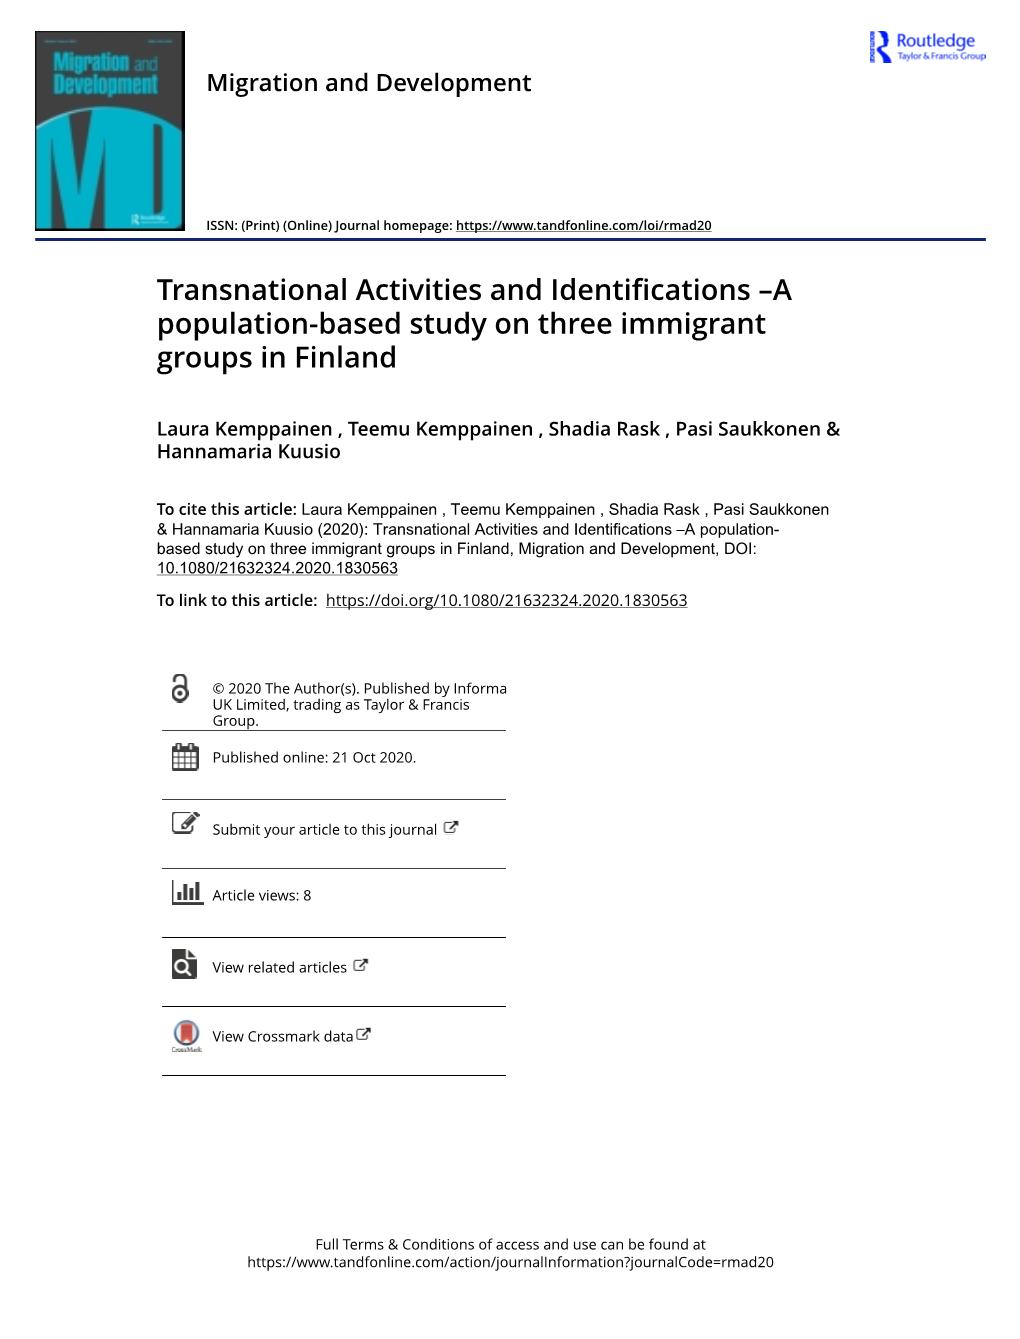 A Population-Based Study on Three Immigrant Groups in Finland